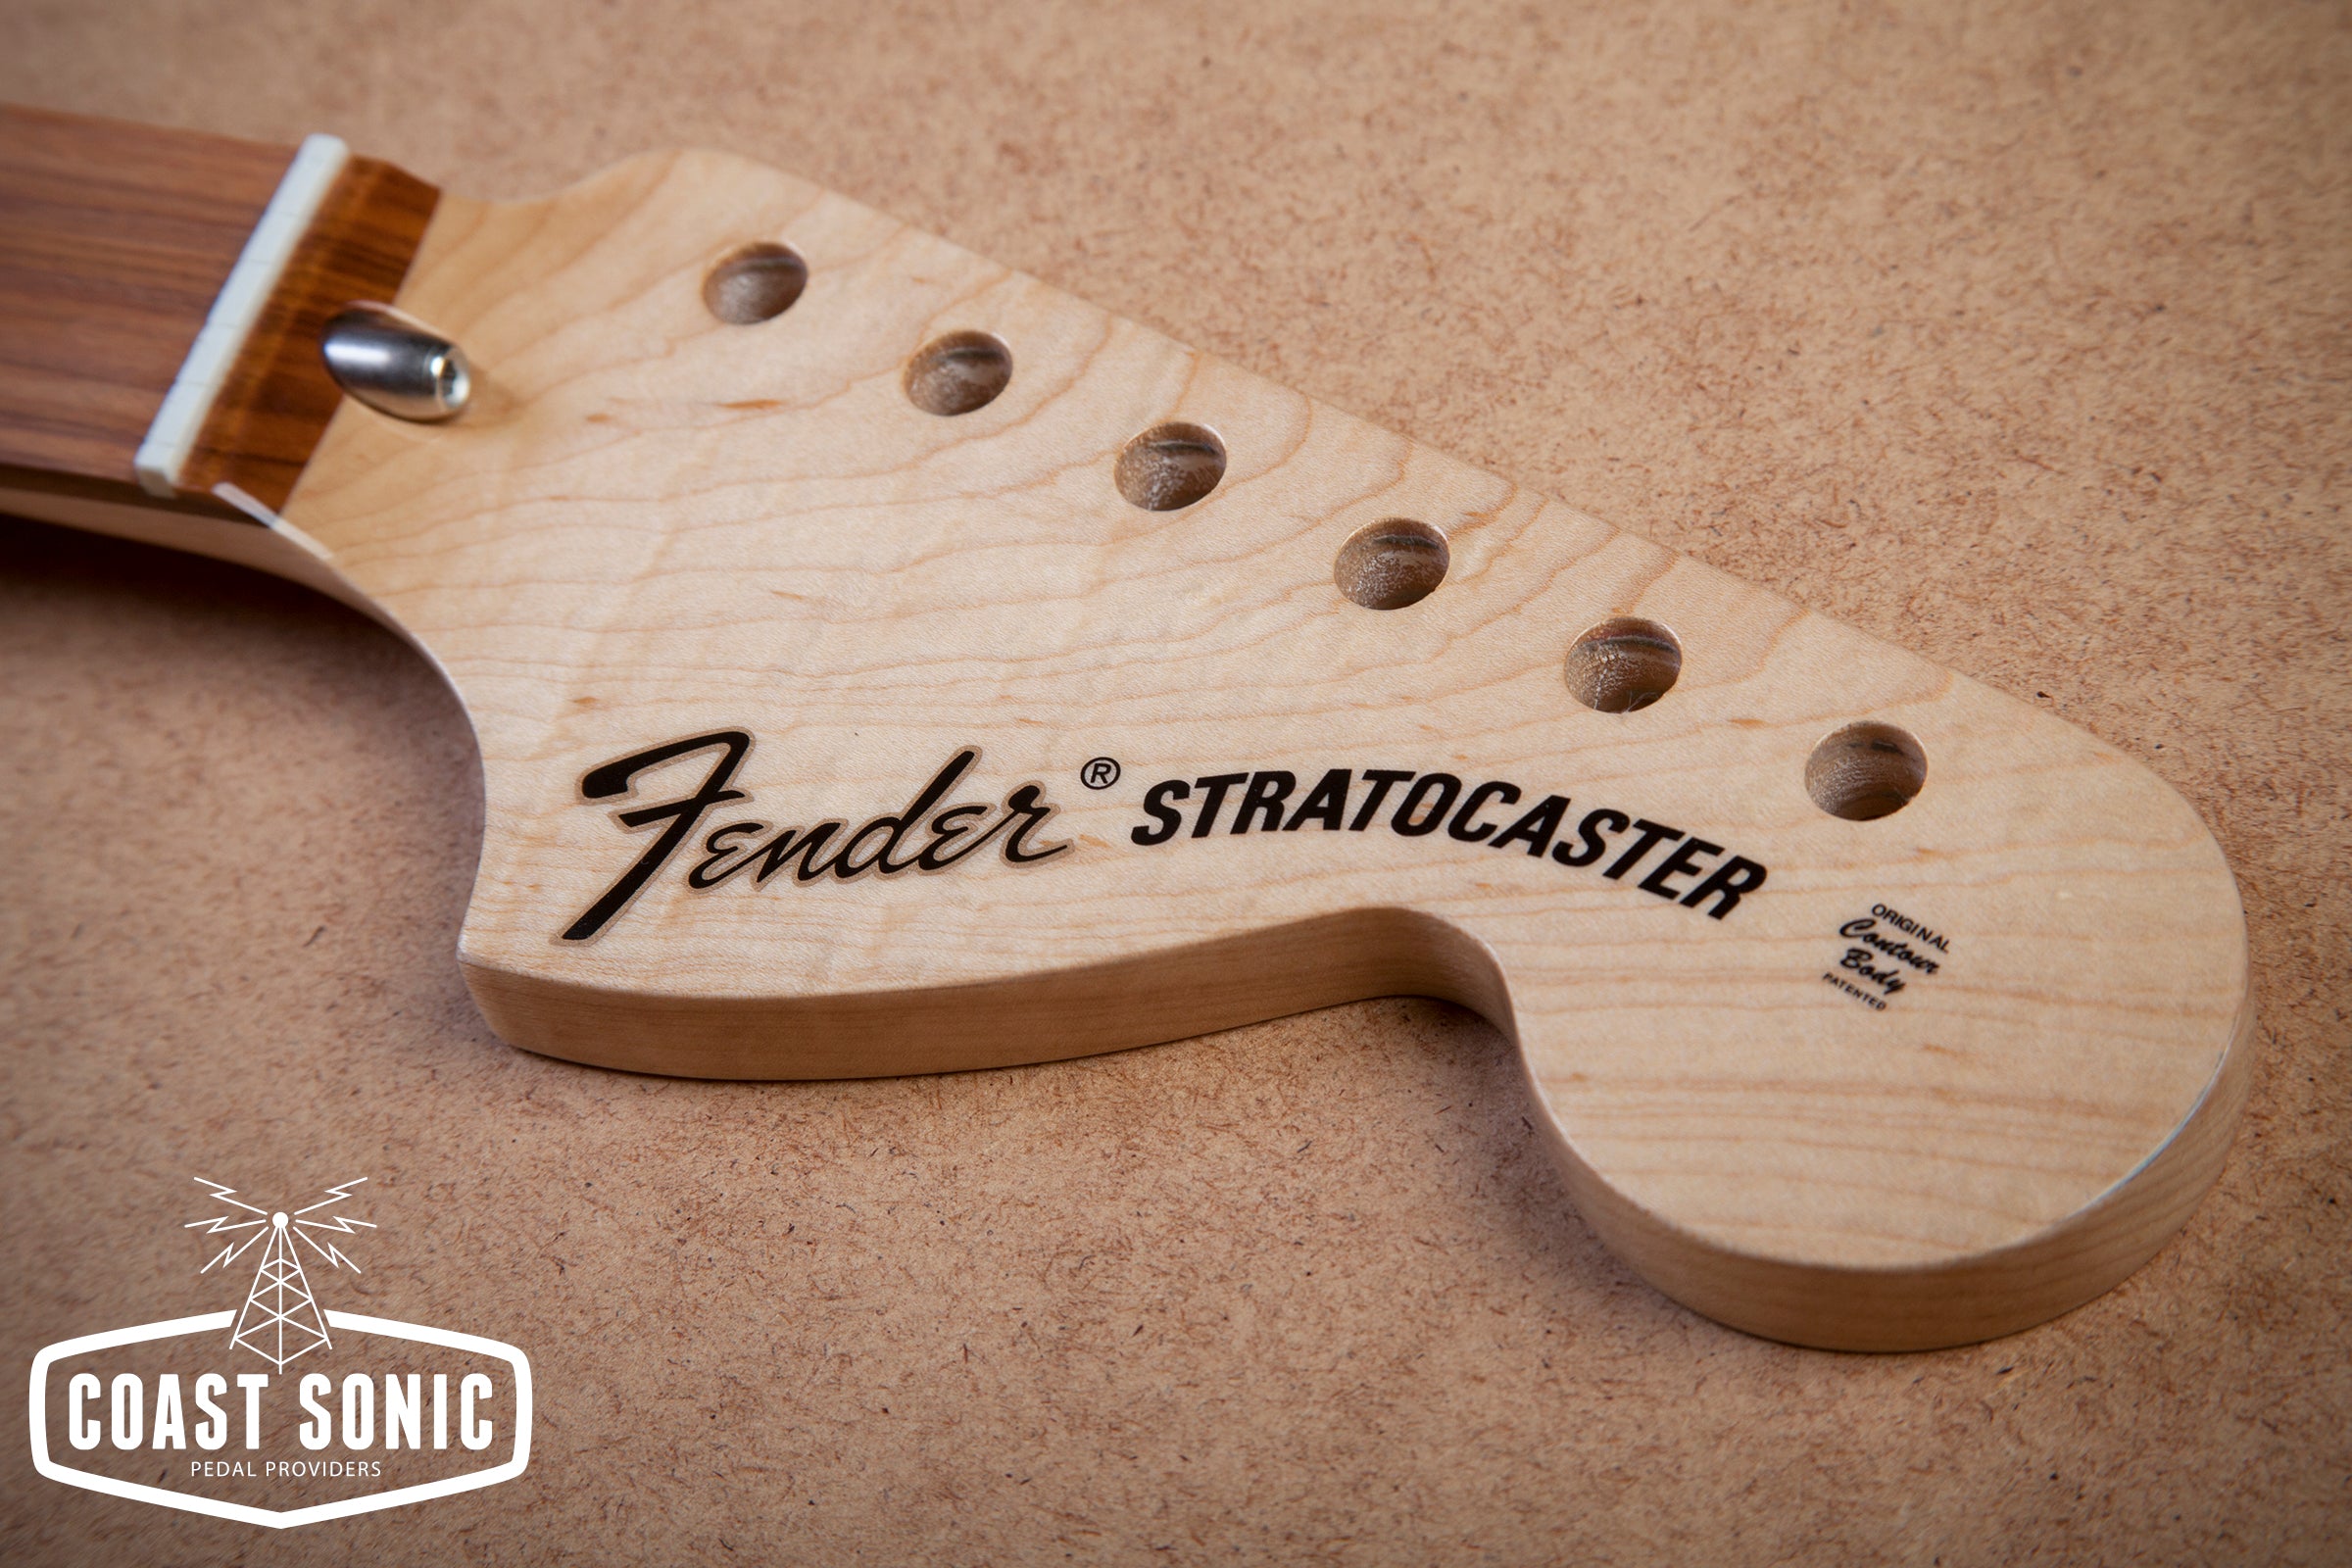 Fender Classic Series '70s Stratocaster